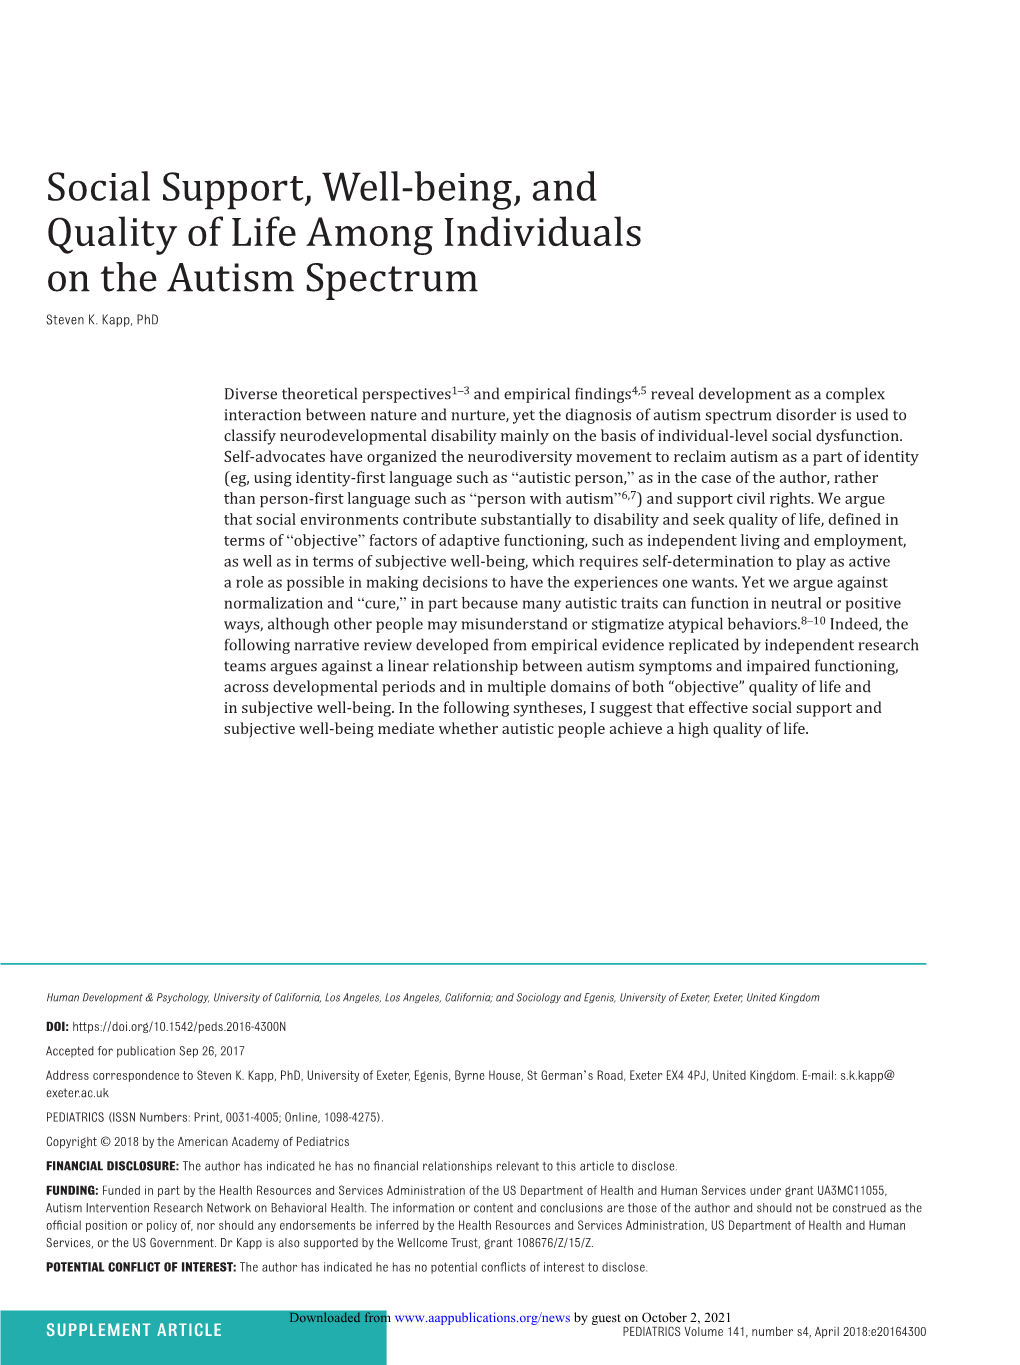 Social Support, Well-Being, and Quality of Life Among Individuals on the Autism Spectrum Steven K